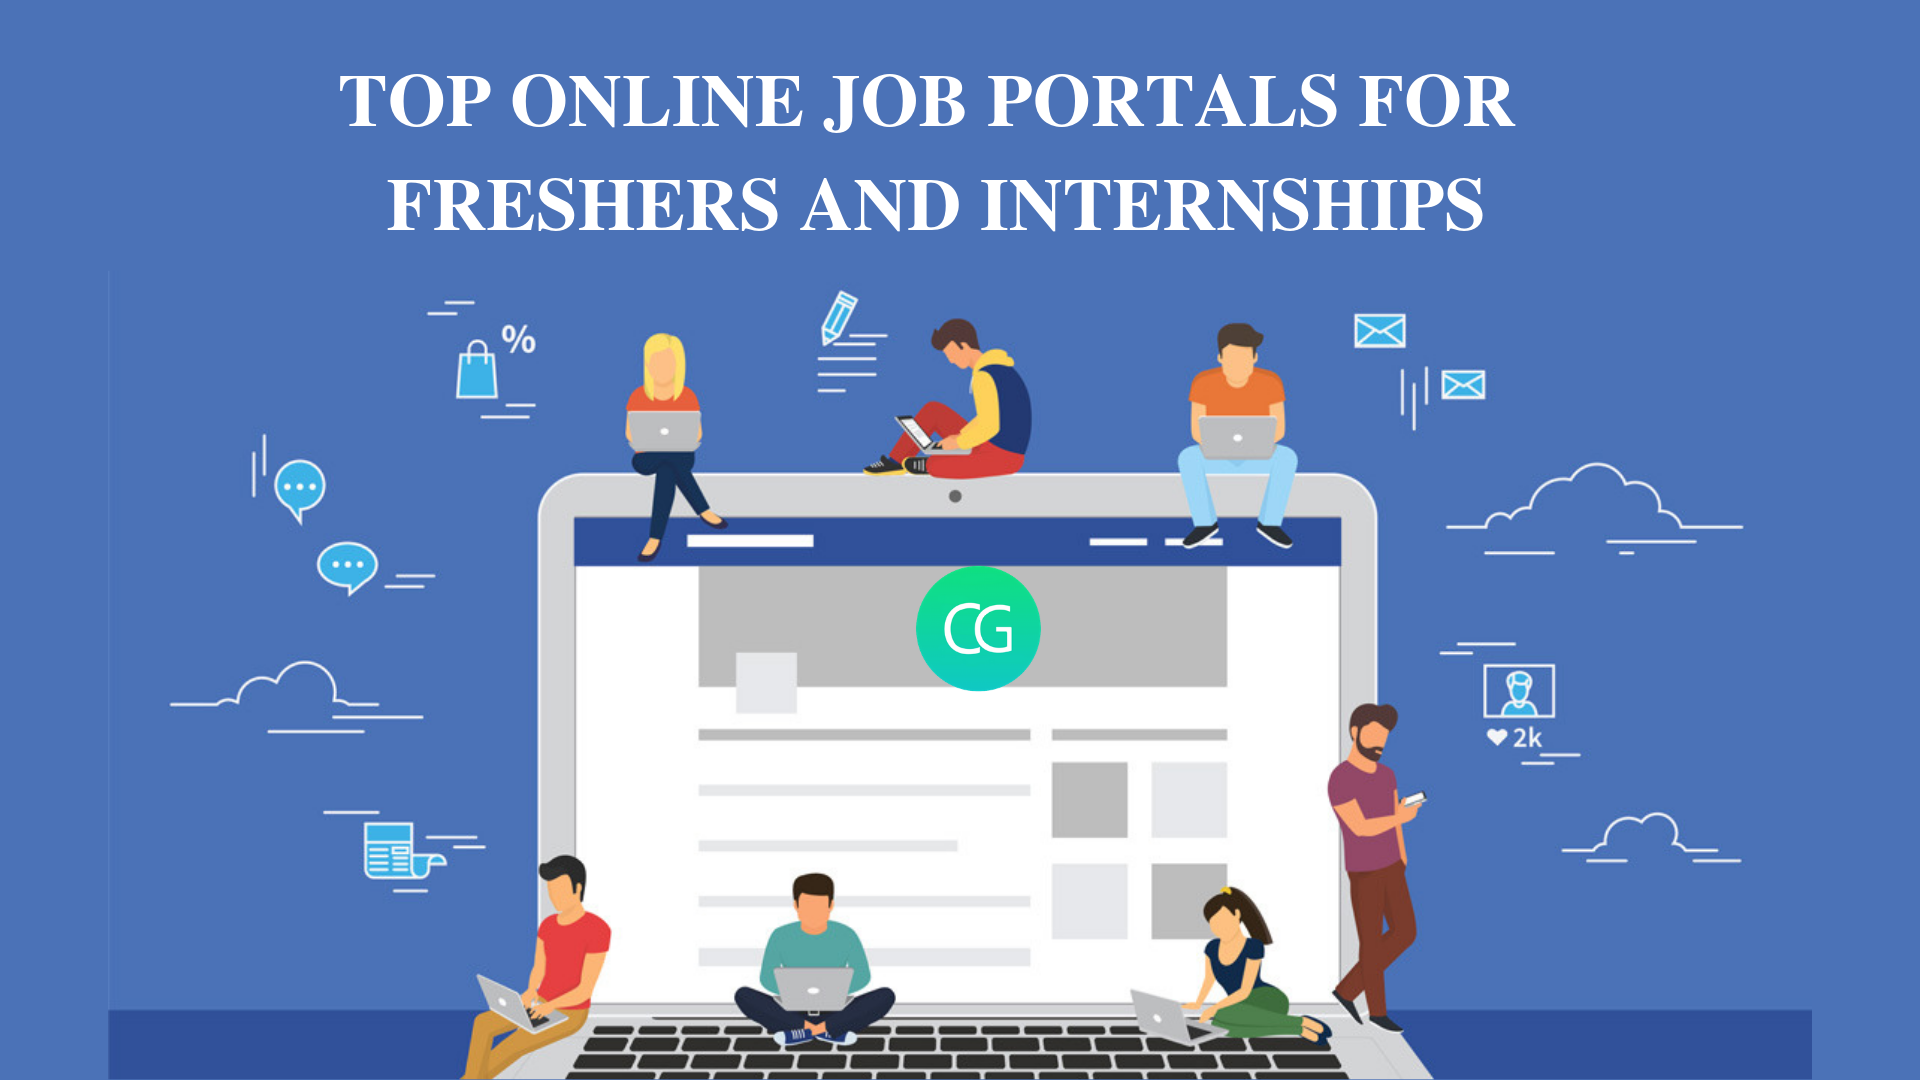 TOP-ONLINE-JOB-PORTAL-FOR-FRESHERS-AND-INTERNSHIPS